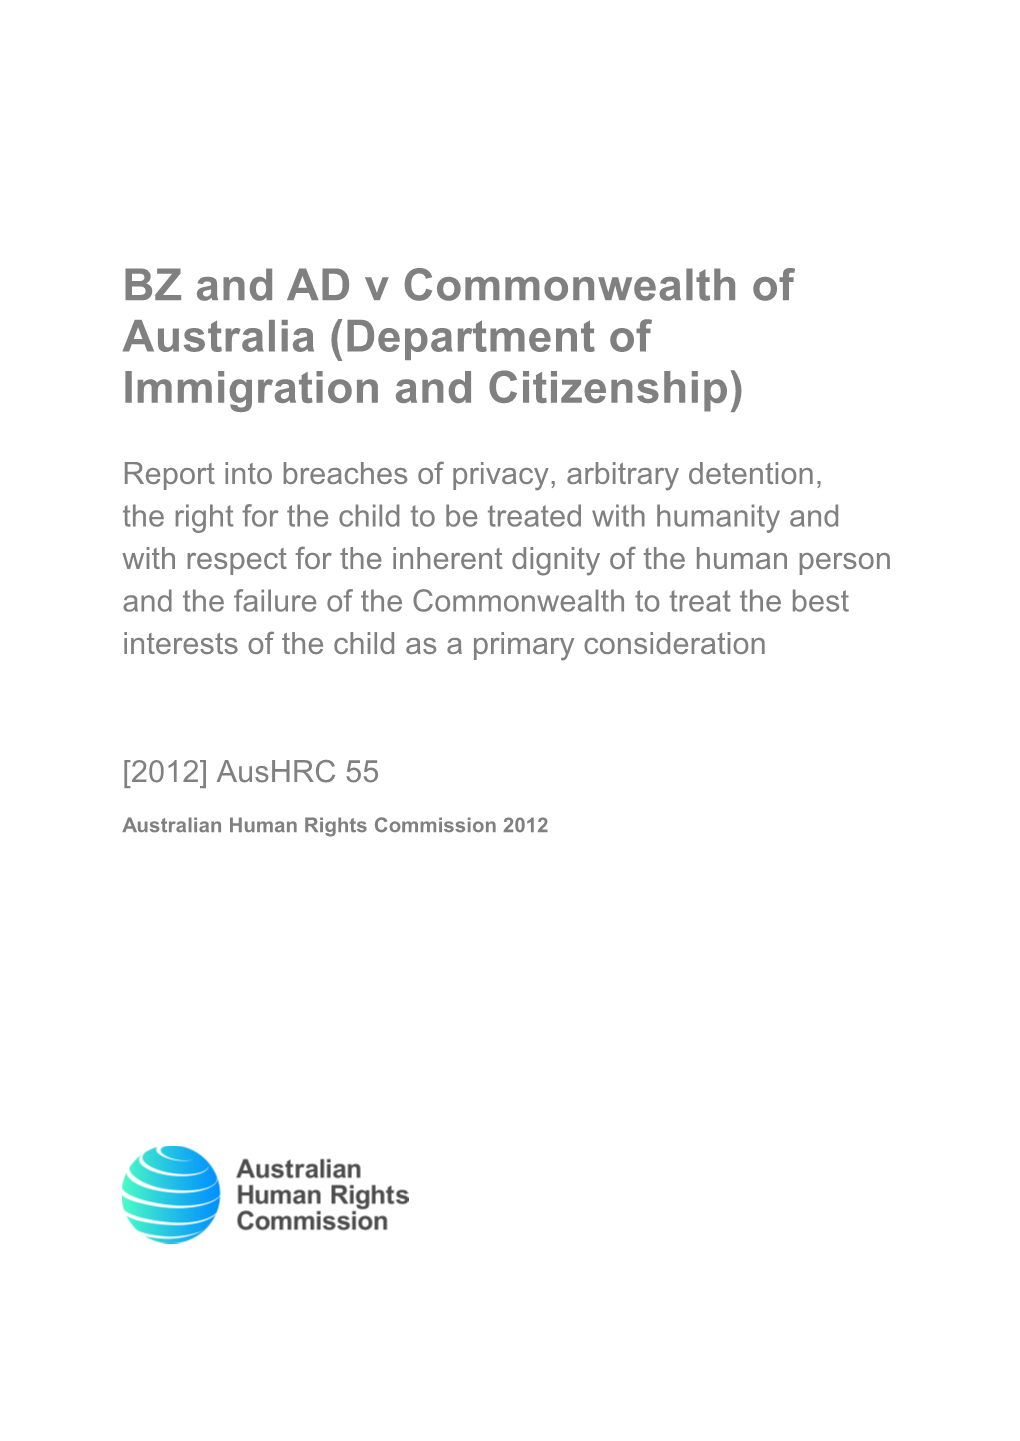 BZ and AD V Commonwealth of Australia (Department of Immigration and Citizenship)